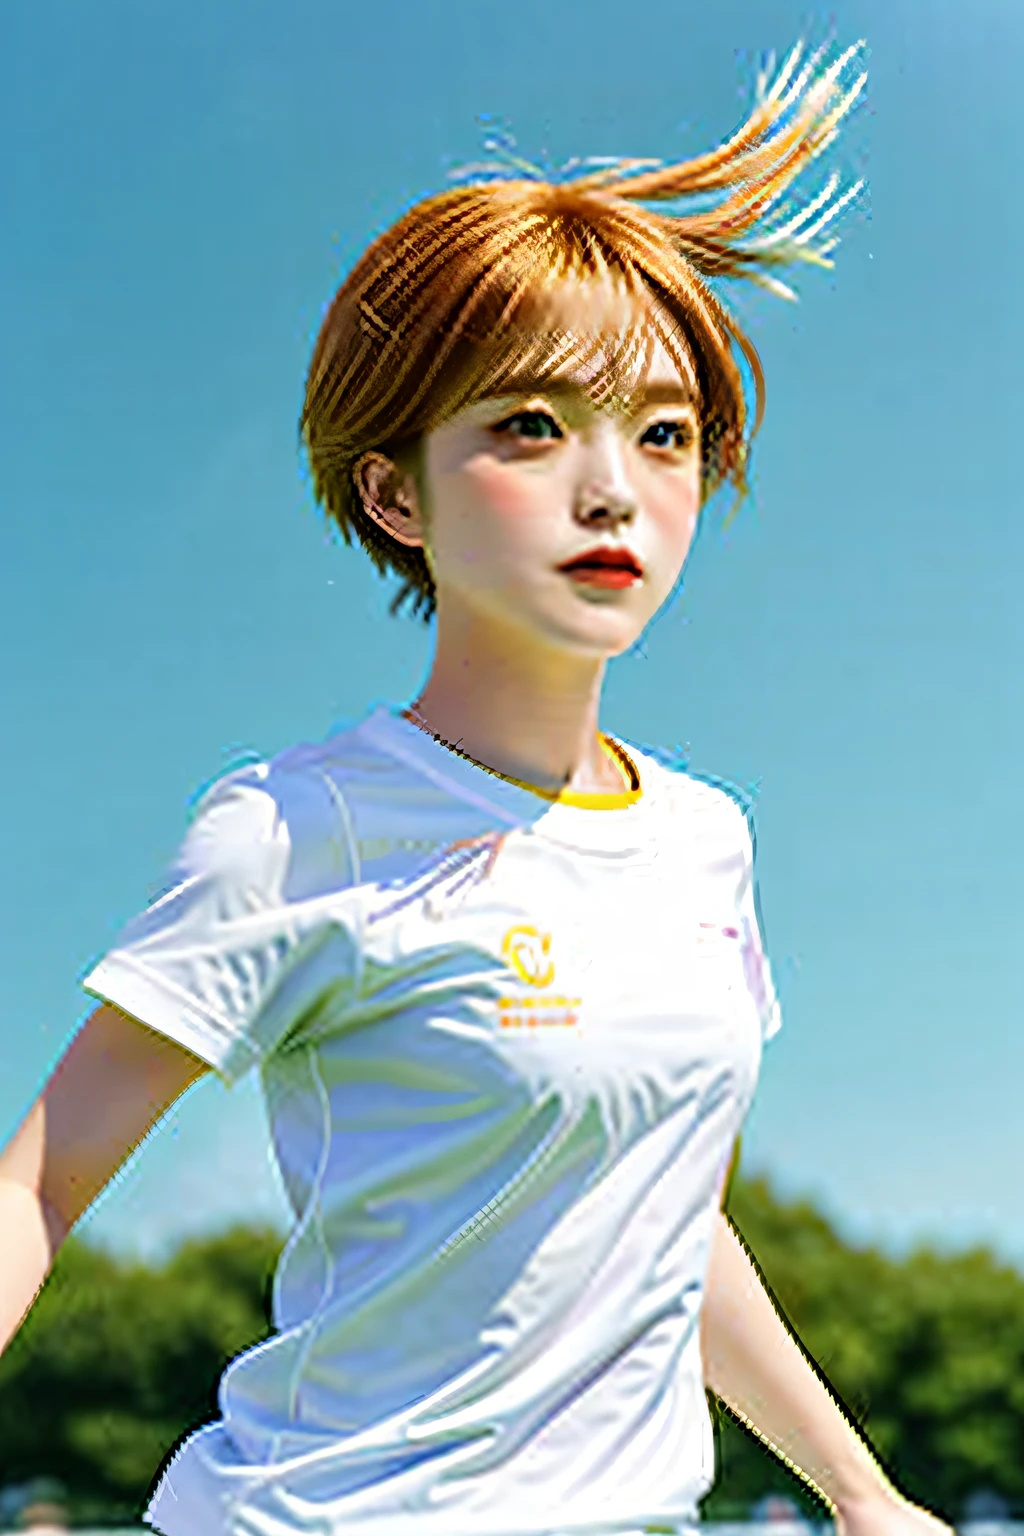 Girl with short hair, sunny and confident, running on grass, wearing white in shirt, the sky is blue, and there is a Shiba Inu by his side